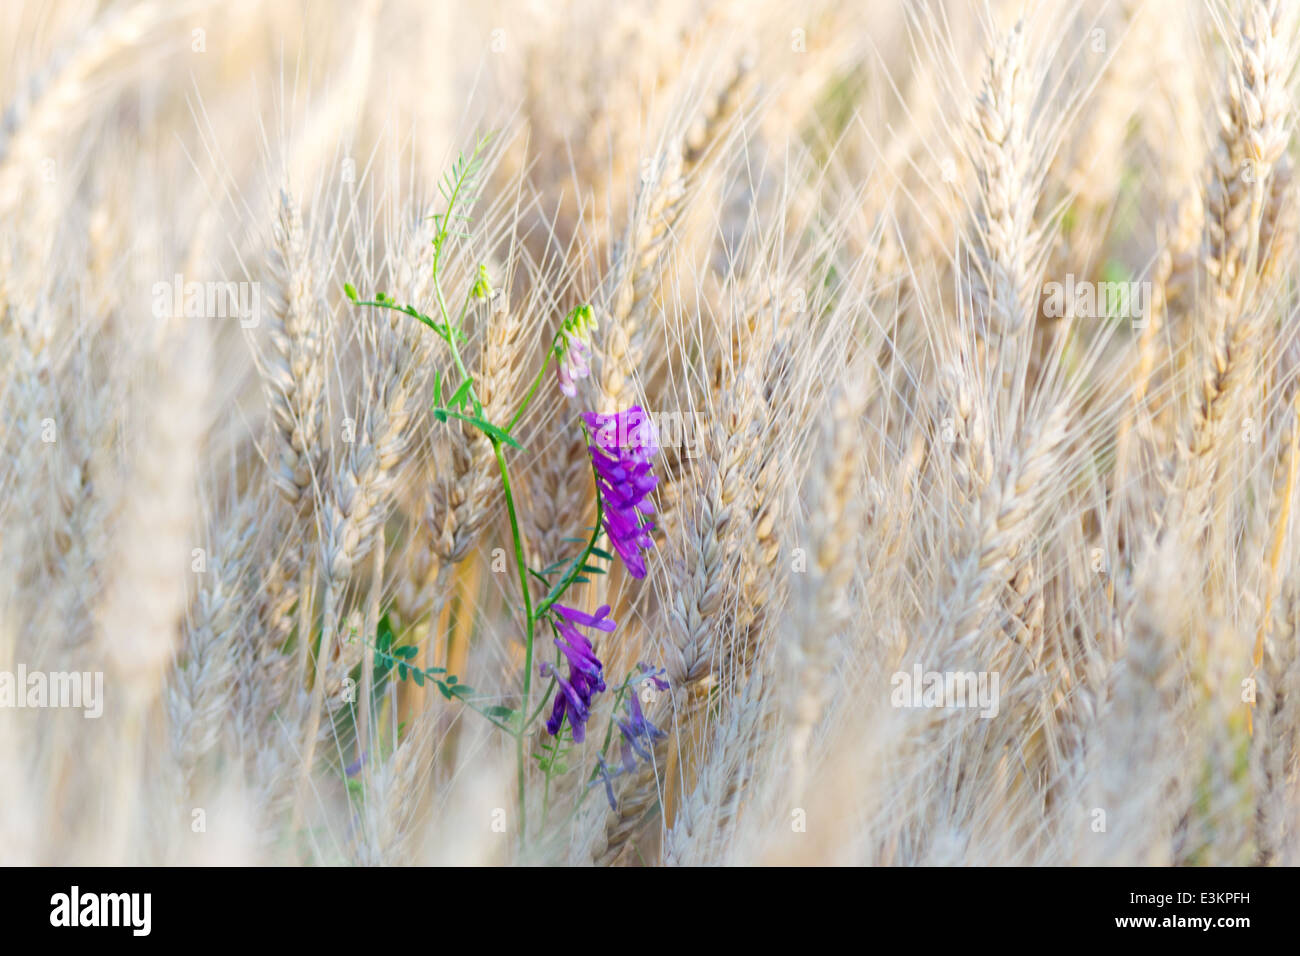 wild flowers in the middle of wheat Stock Photo